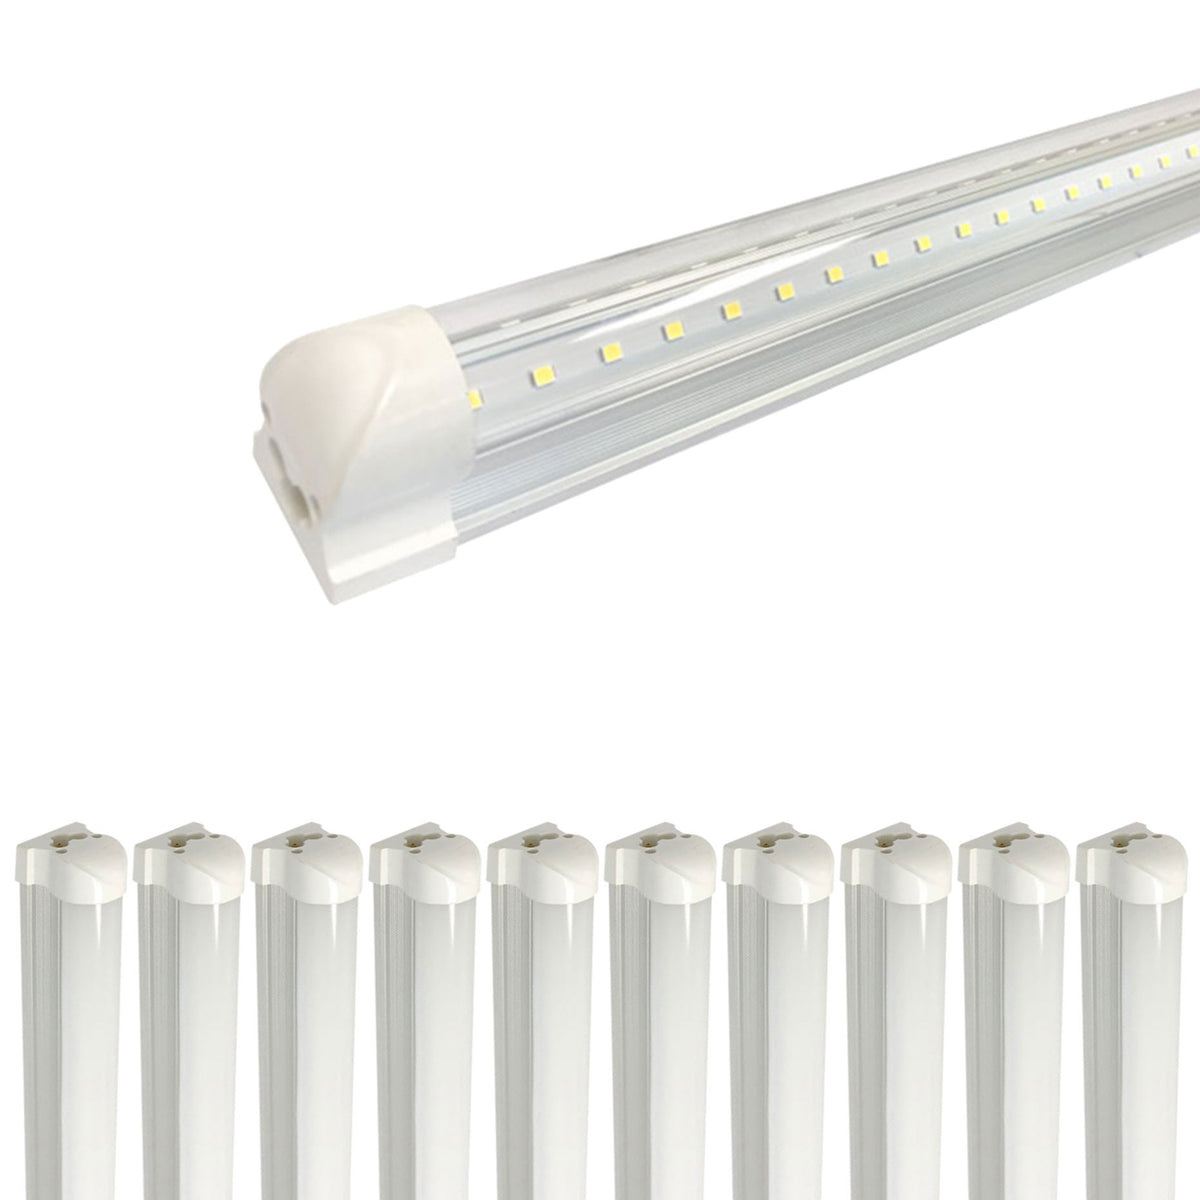 Picture of Viribright 519022 5000K 96 in. 60W Tube LED Tubular Bulb, Clear - Pack of 10